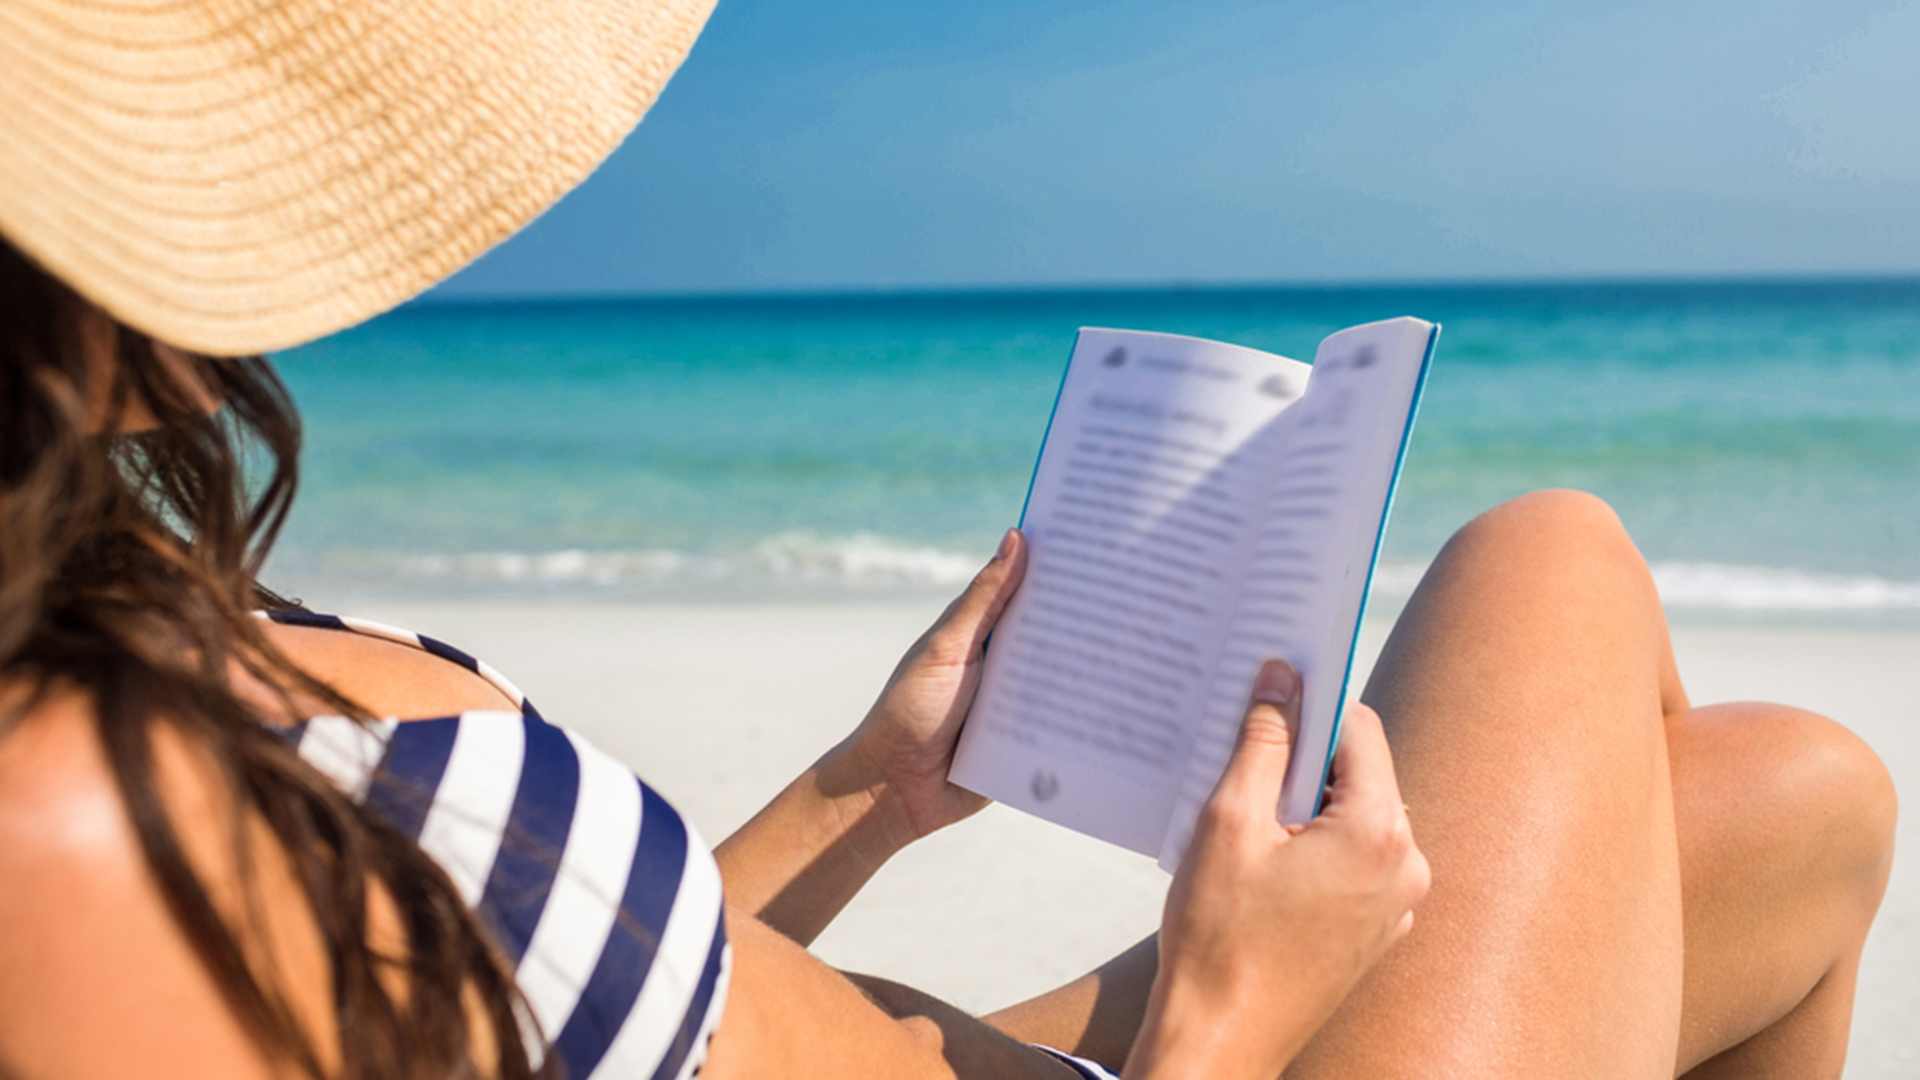 The Top 10 Reads This Summer